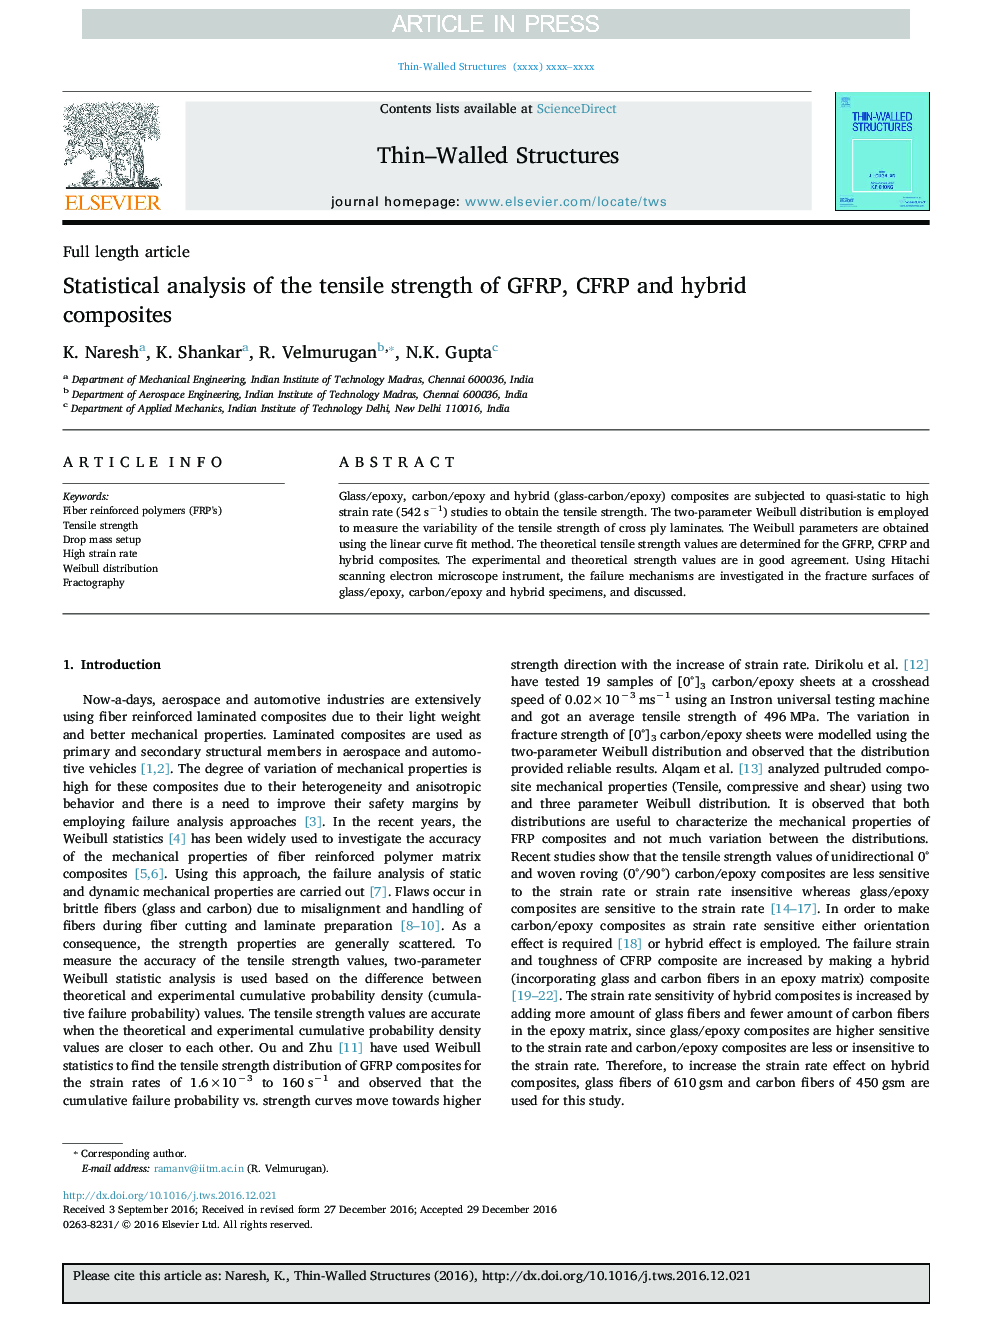 Statistical analysis of the tensile strength of GFRP, CFRP and hybrid composites